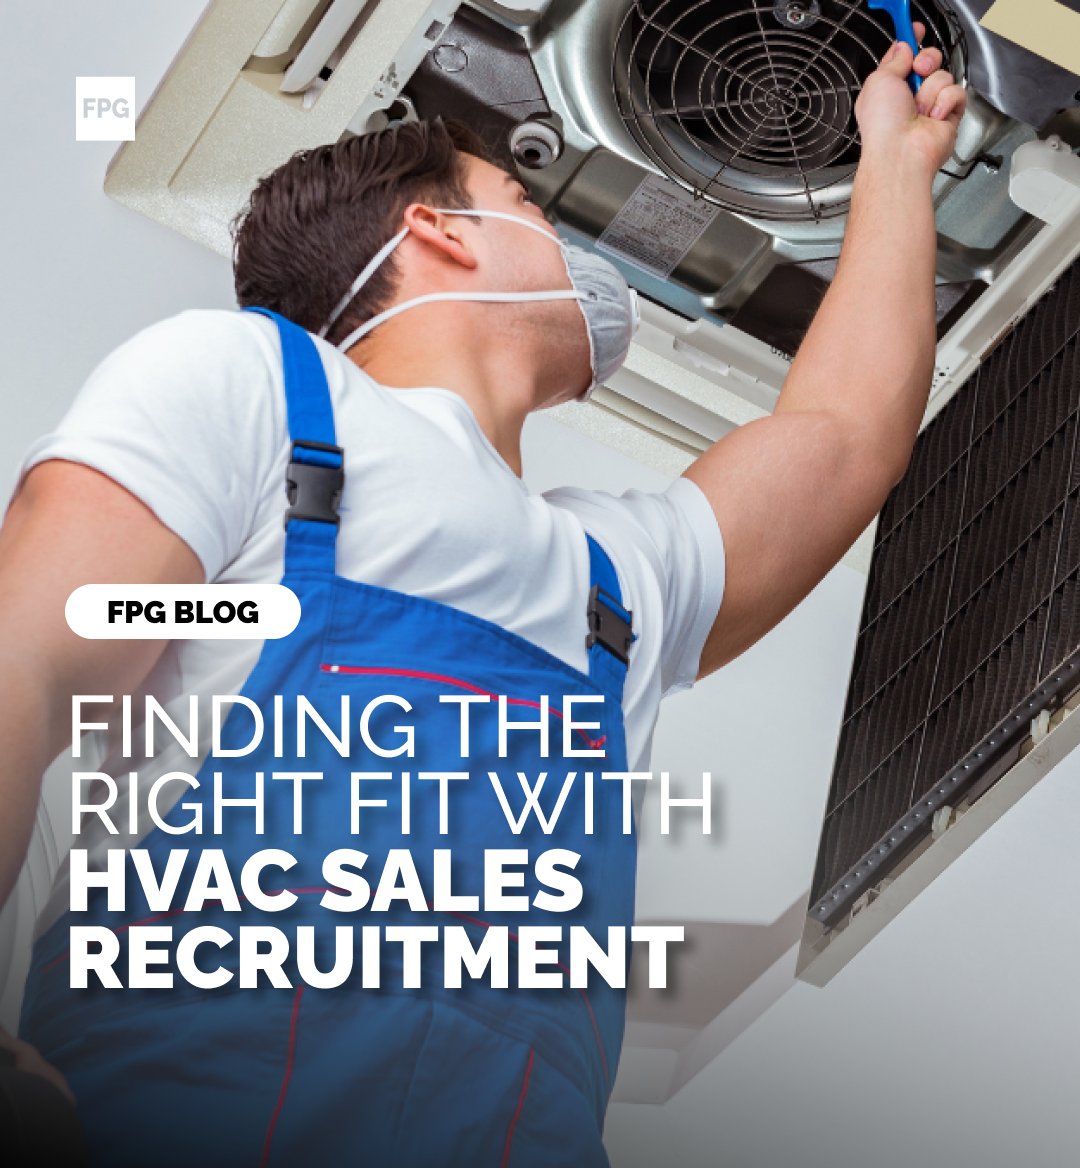 Looking to uplevel your HVAC sales team? 🌬️💼 Our latest guide dives into effective recruitment strategies to attract top talent in the HVAC industry.

Read now! fpg.com/blog/hvac-sale…

#FPGBlog #HVACSales #SalesRecruitment